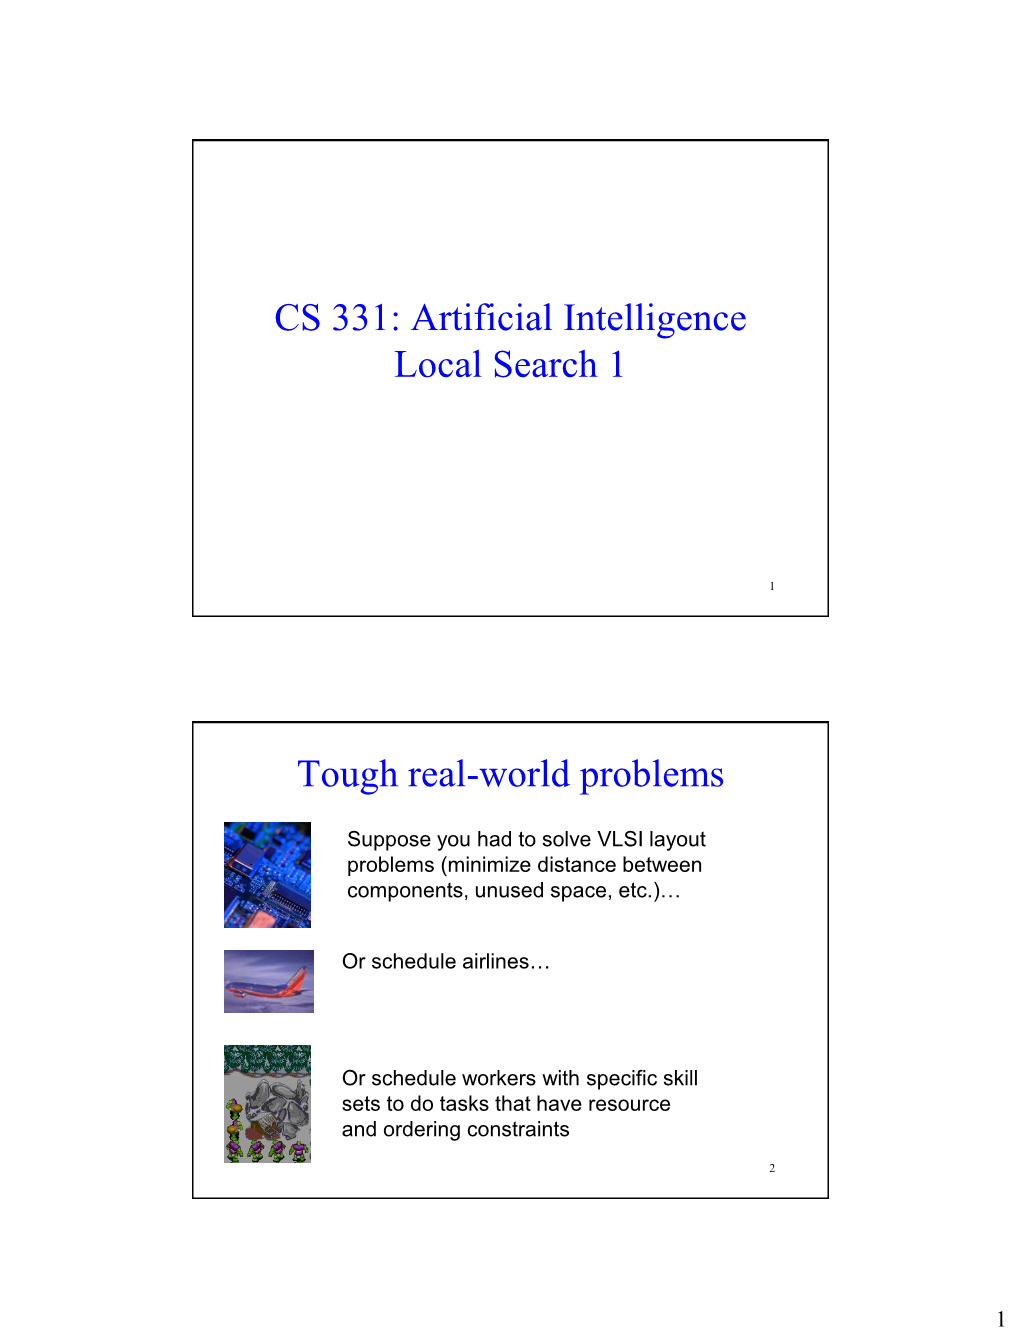 CS 331: Artificial Intelligence Local Search 1 Tough Real-World Problems